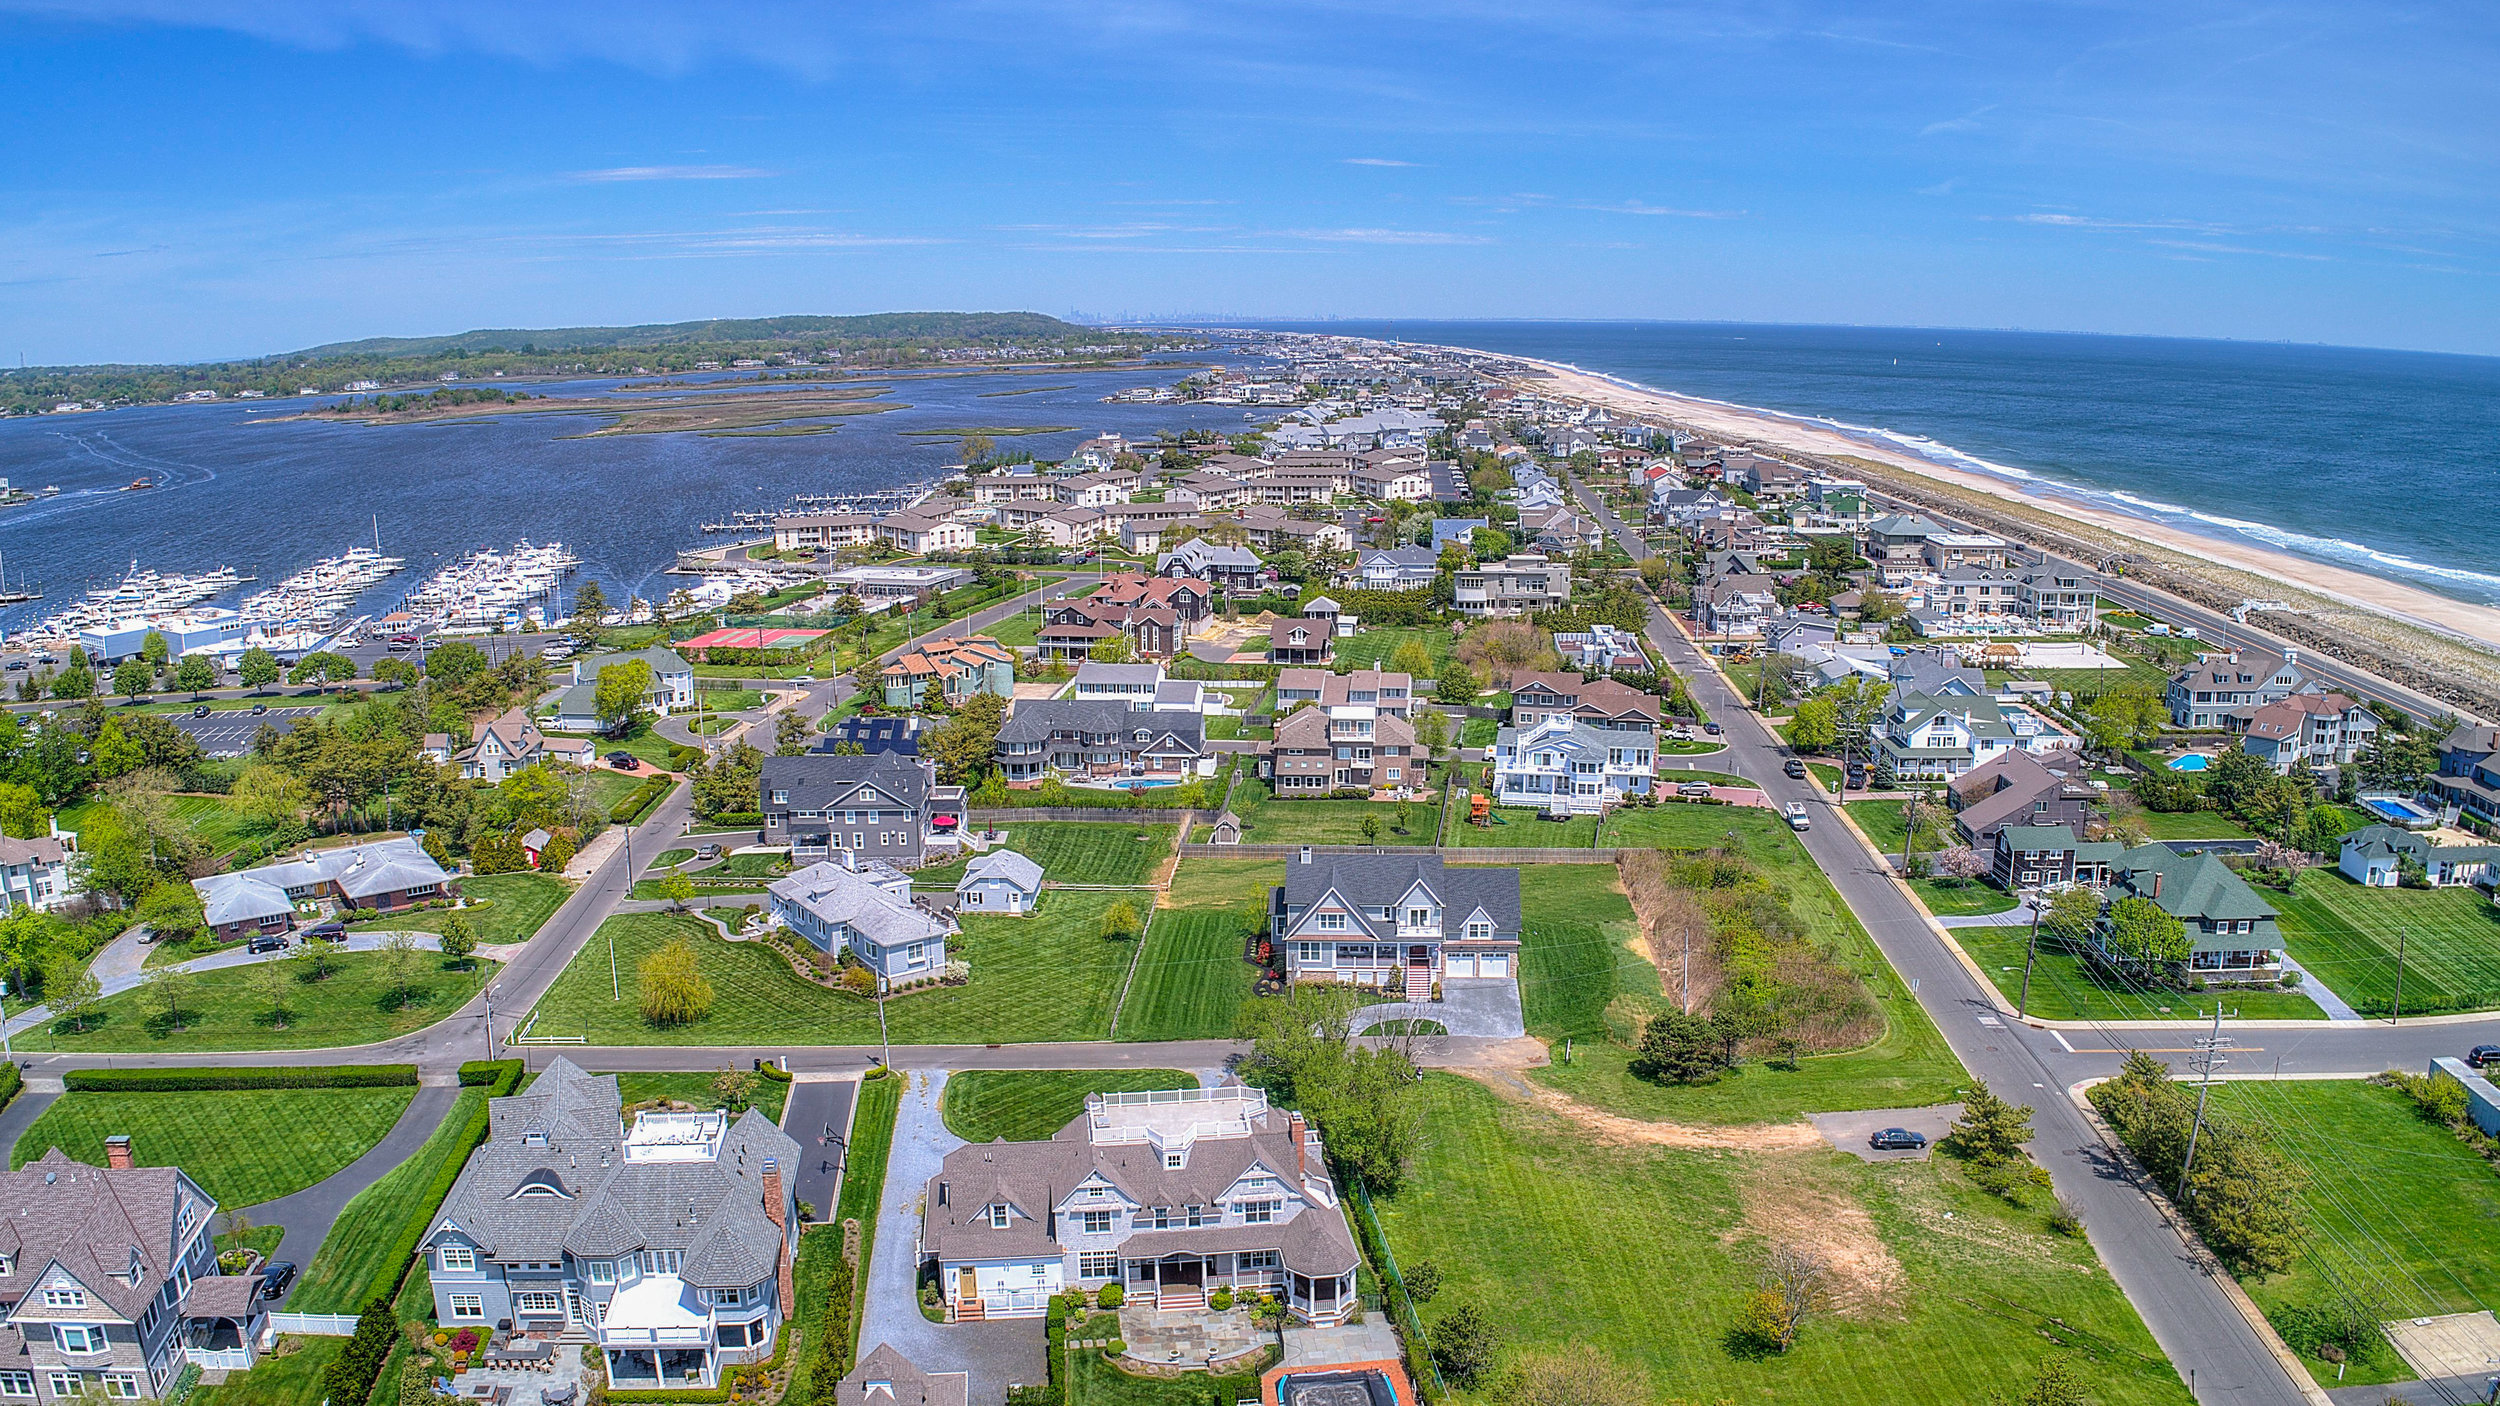 Monmouth Beach New Jersey Home on the ocean drone photo